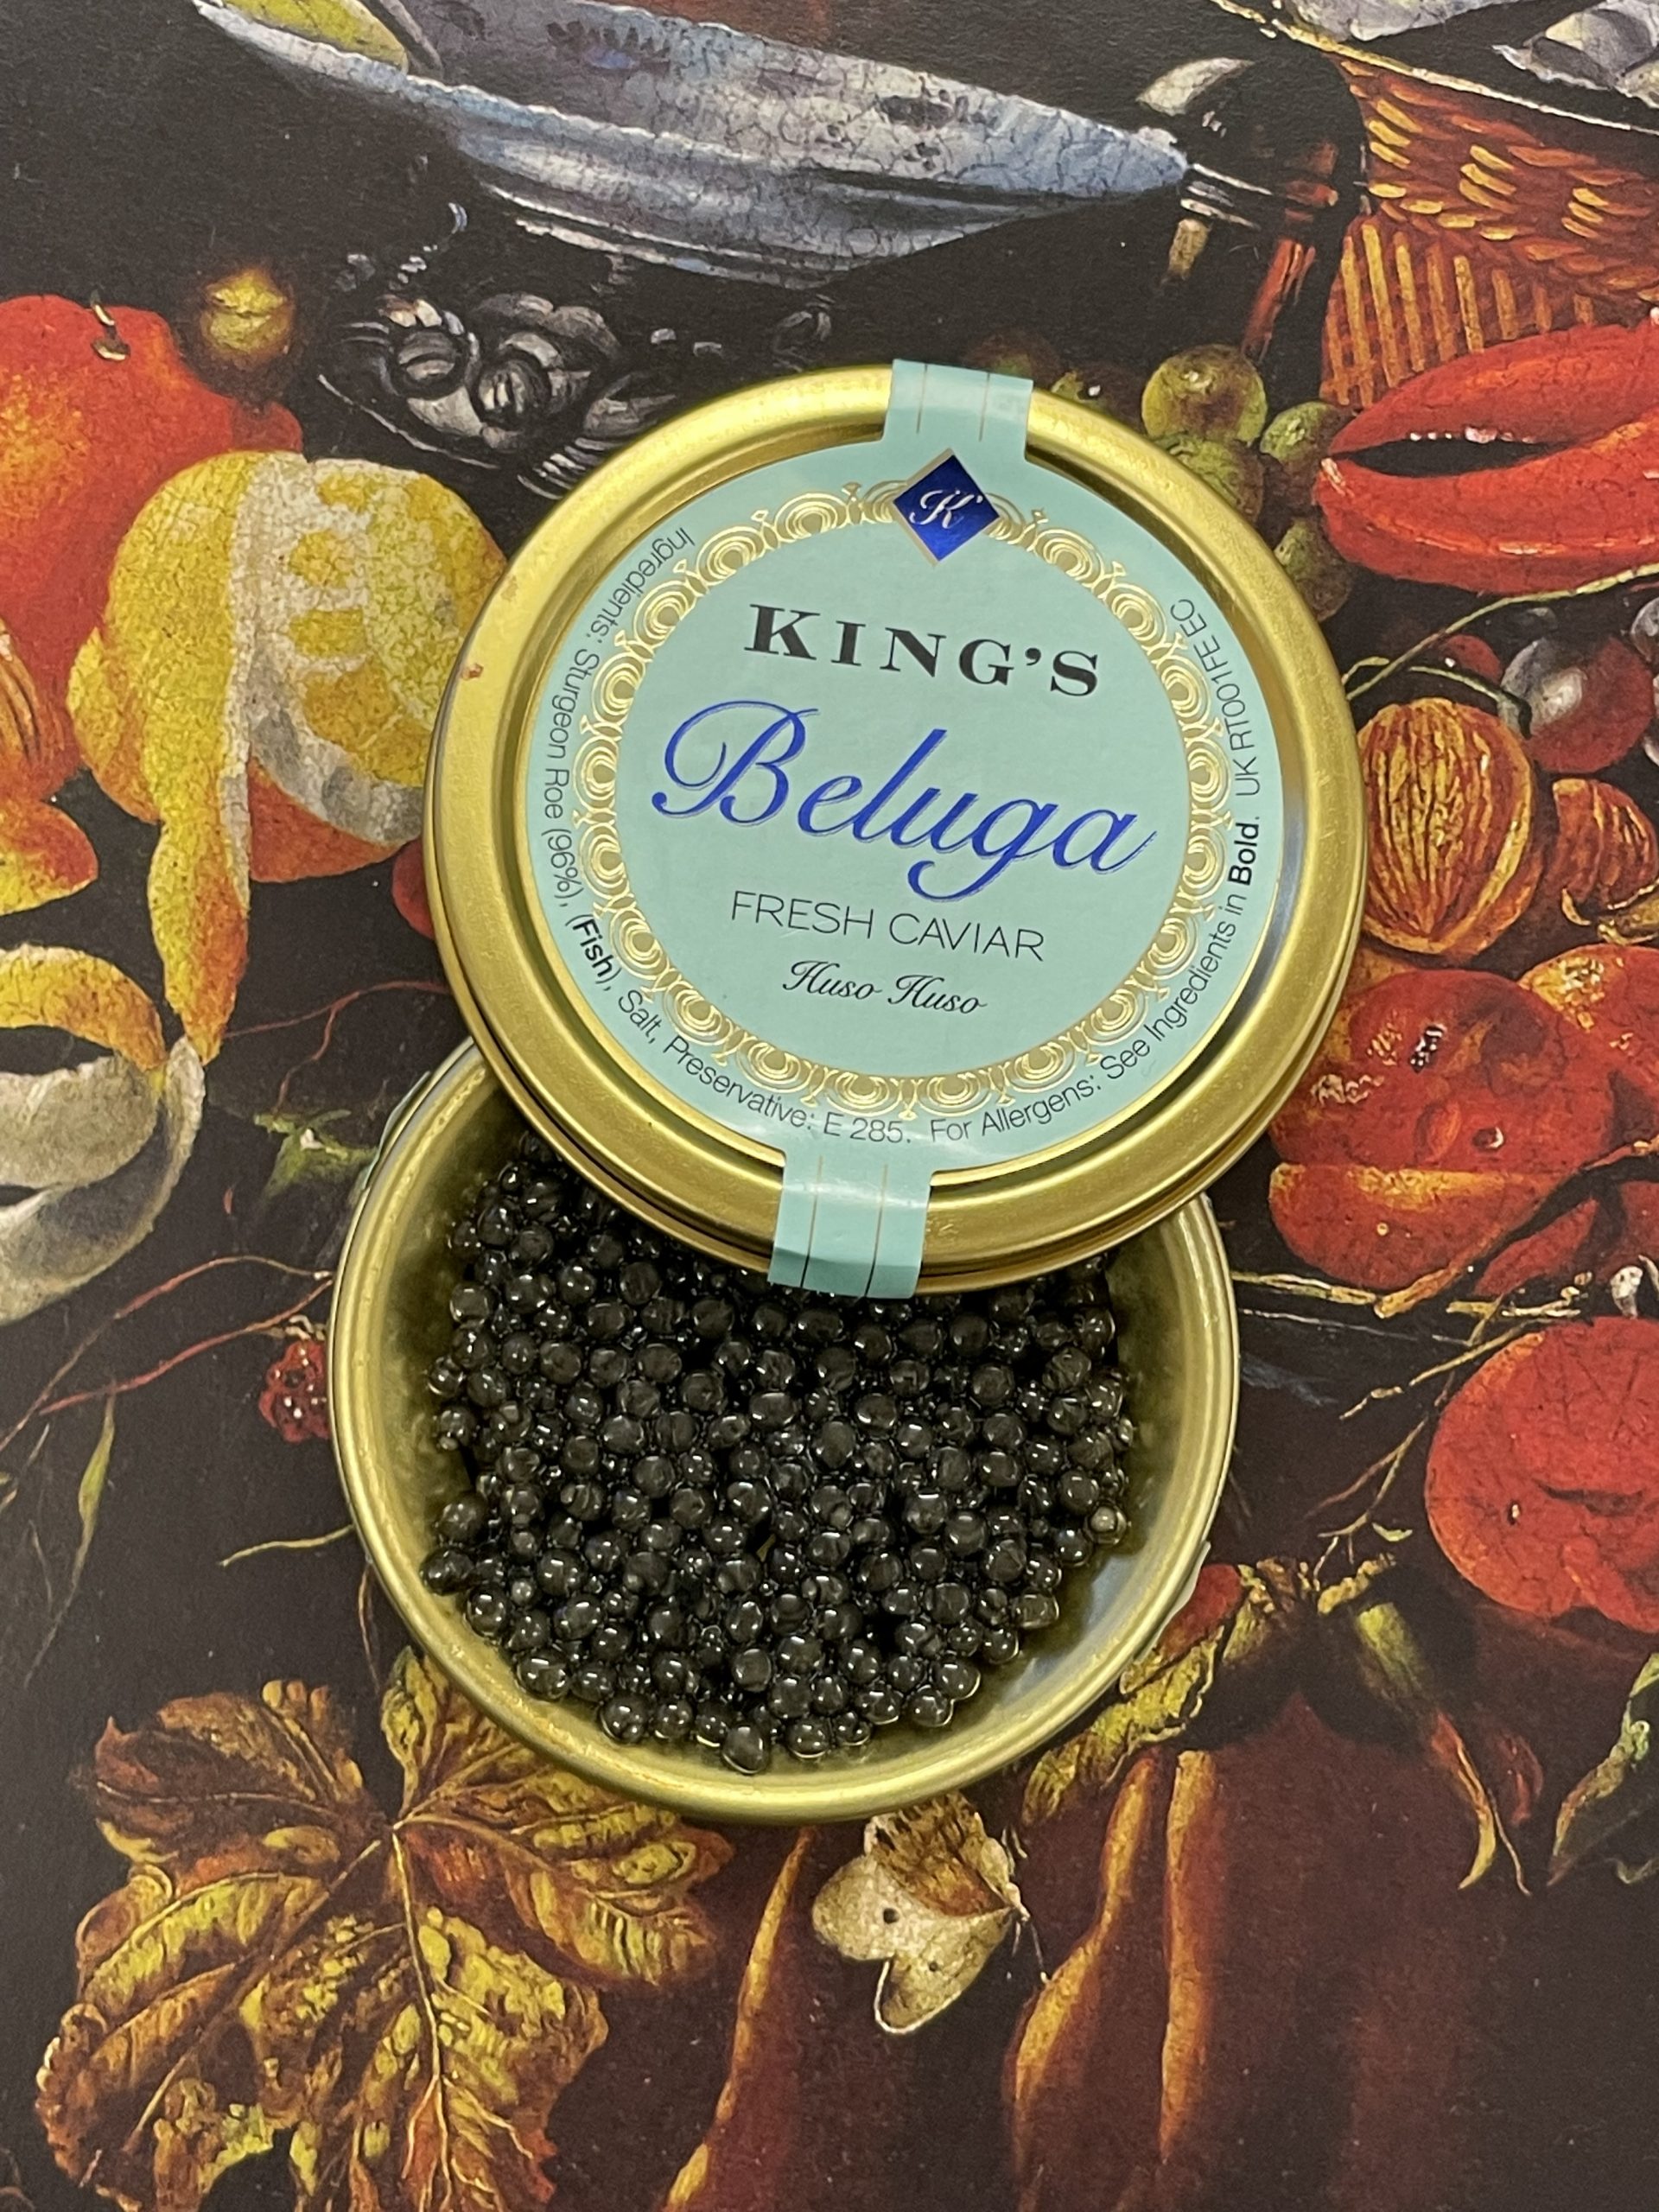 Royal Oscietra Caviar 30g. Delivery on Tuesday and Friday